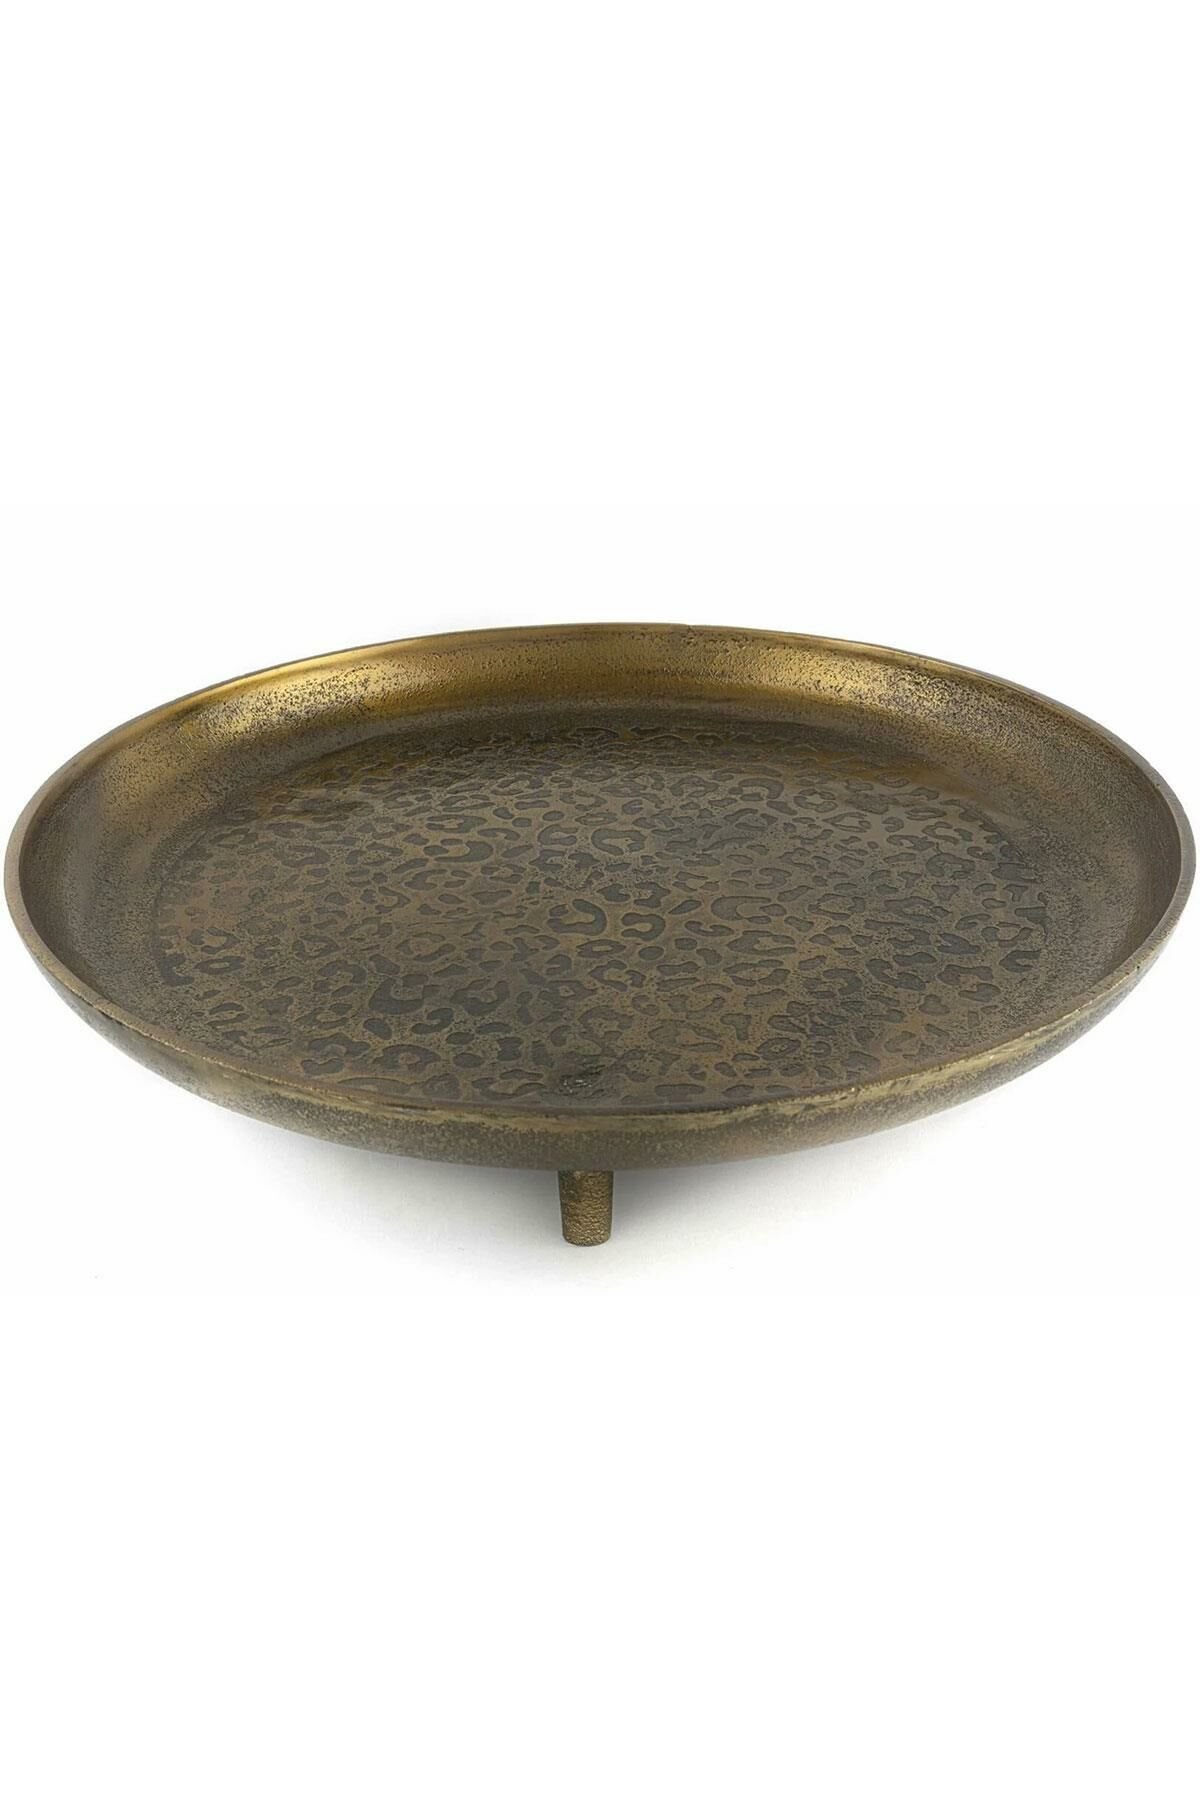 ANTIQUE GOLD FOOT TRAY 41*9CM